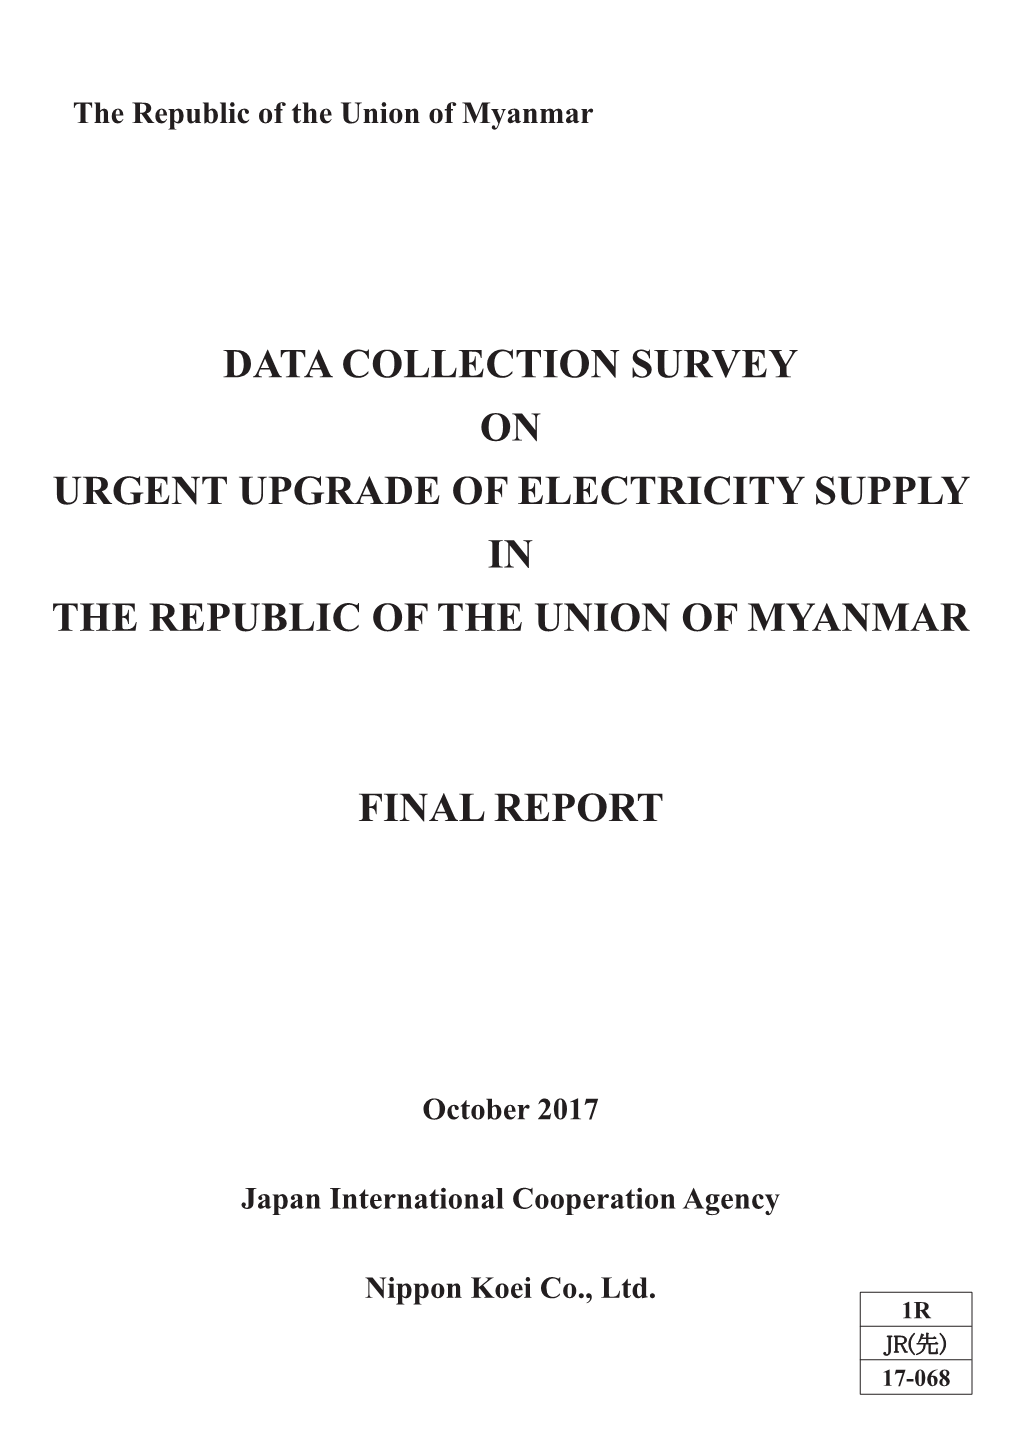 Data Collection Survey on Urgent Upgrade of Electricity Supply in the Republic of the Union of Myanmar Final Report